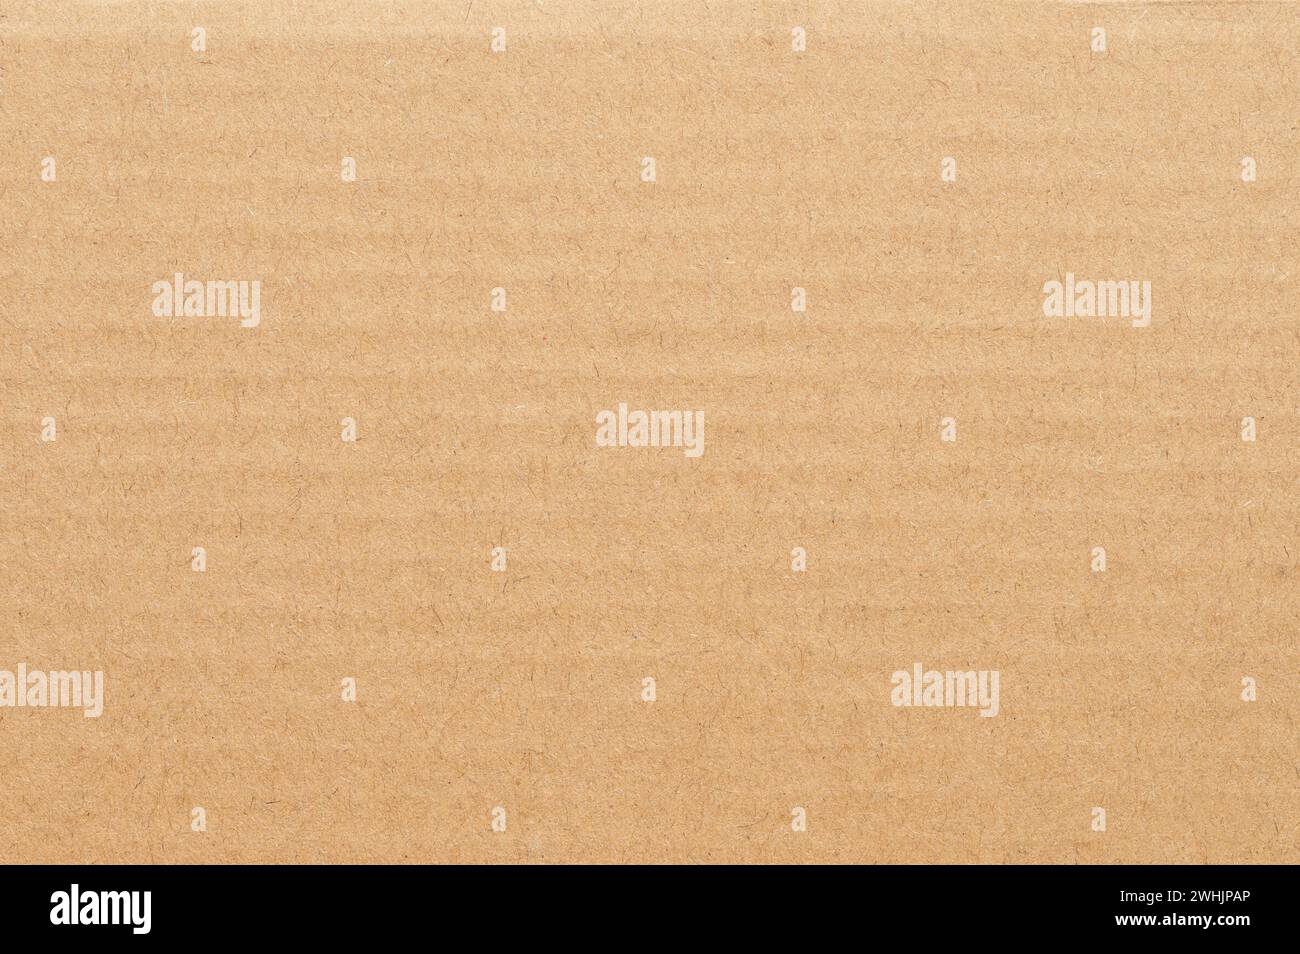 Ripple brown paper texture background macro close up view Stock Photo